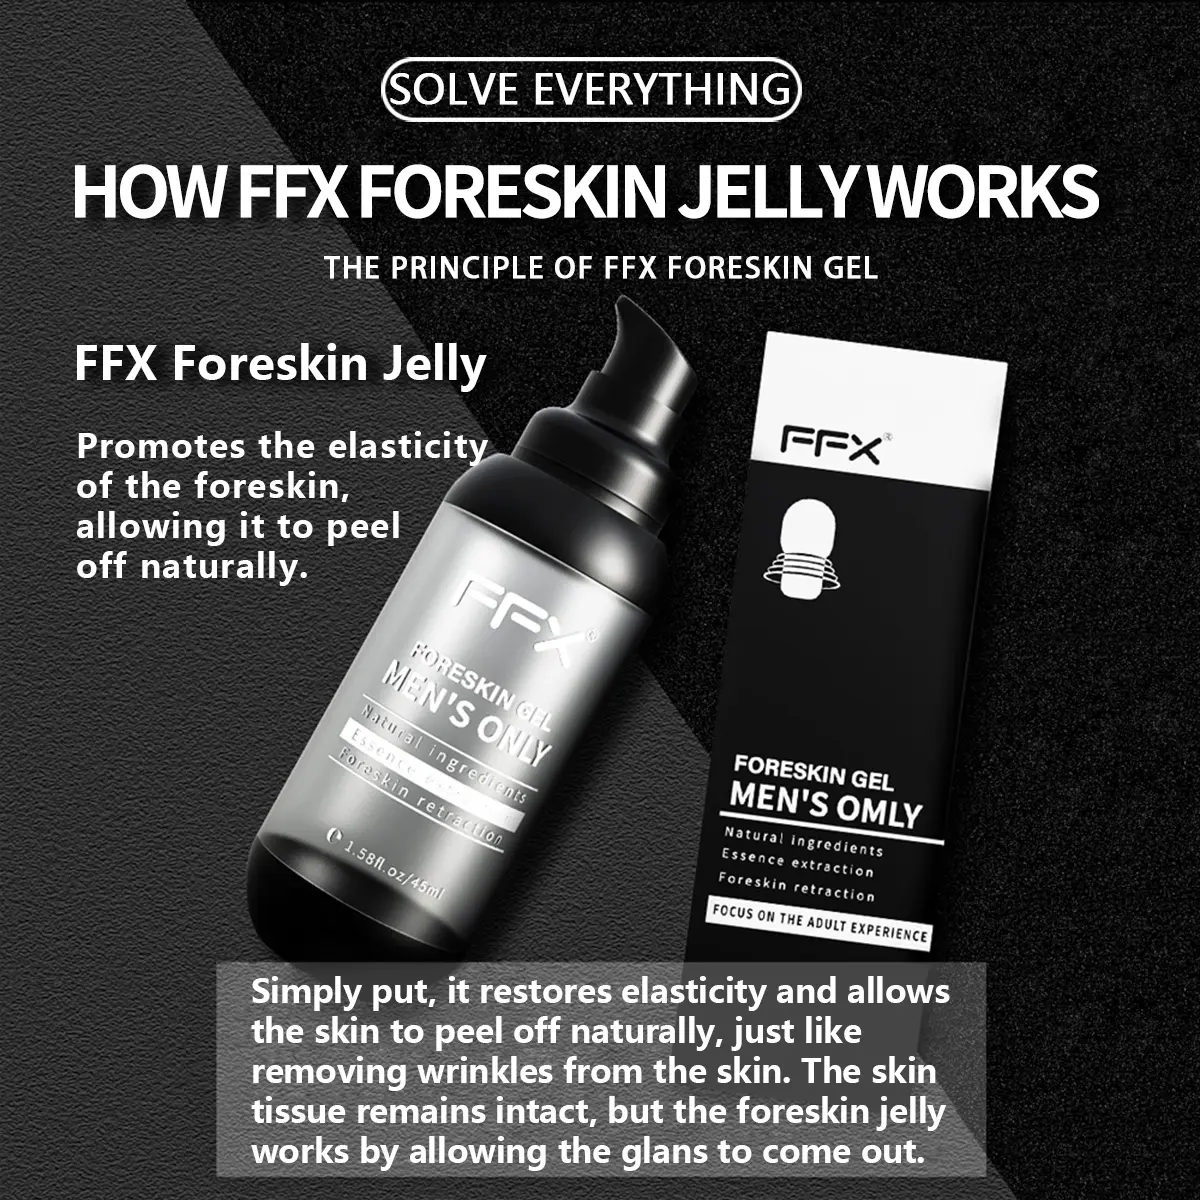 foreskin cream for phimosis，rico gold gel para crecer el pene permanente，steroid cream for phimosis，dht cream for penile growth，glans rings, head rings，productos para crecer el pene